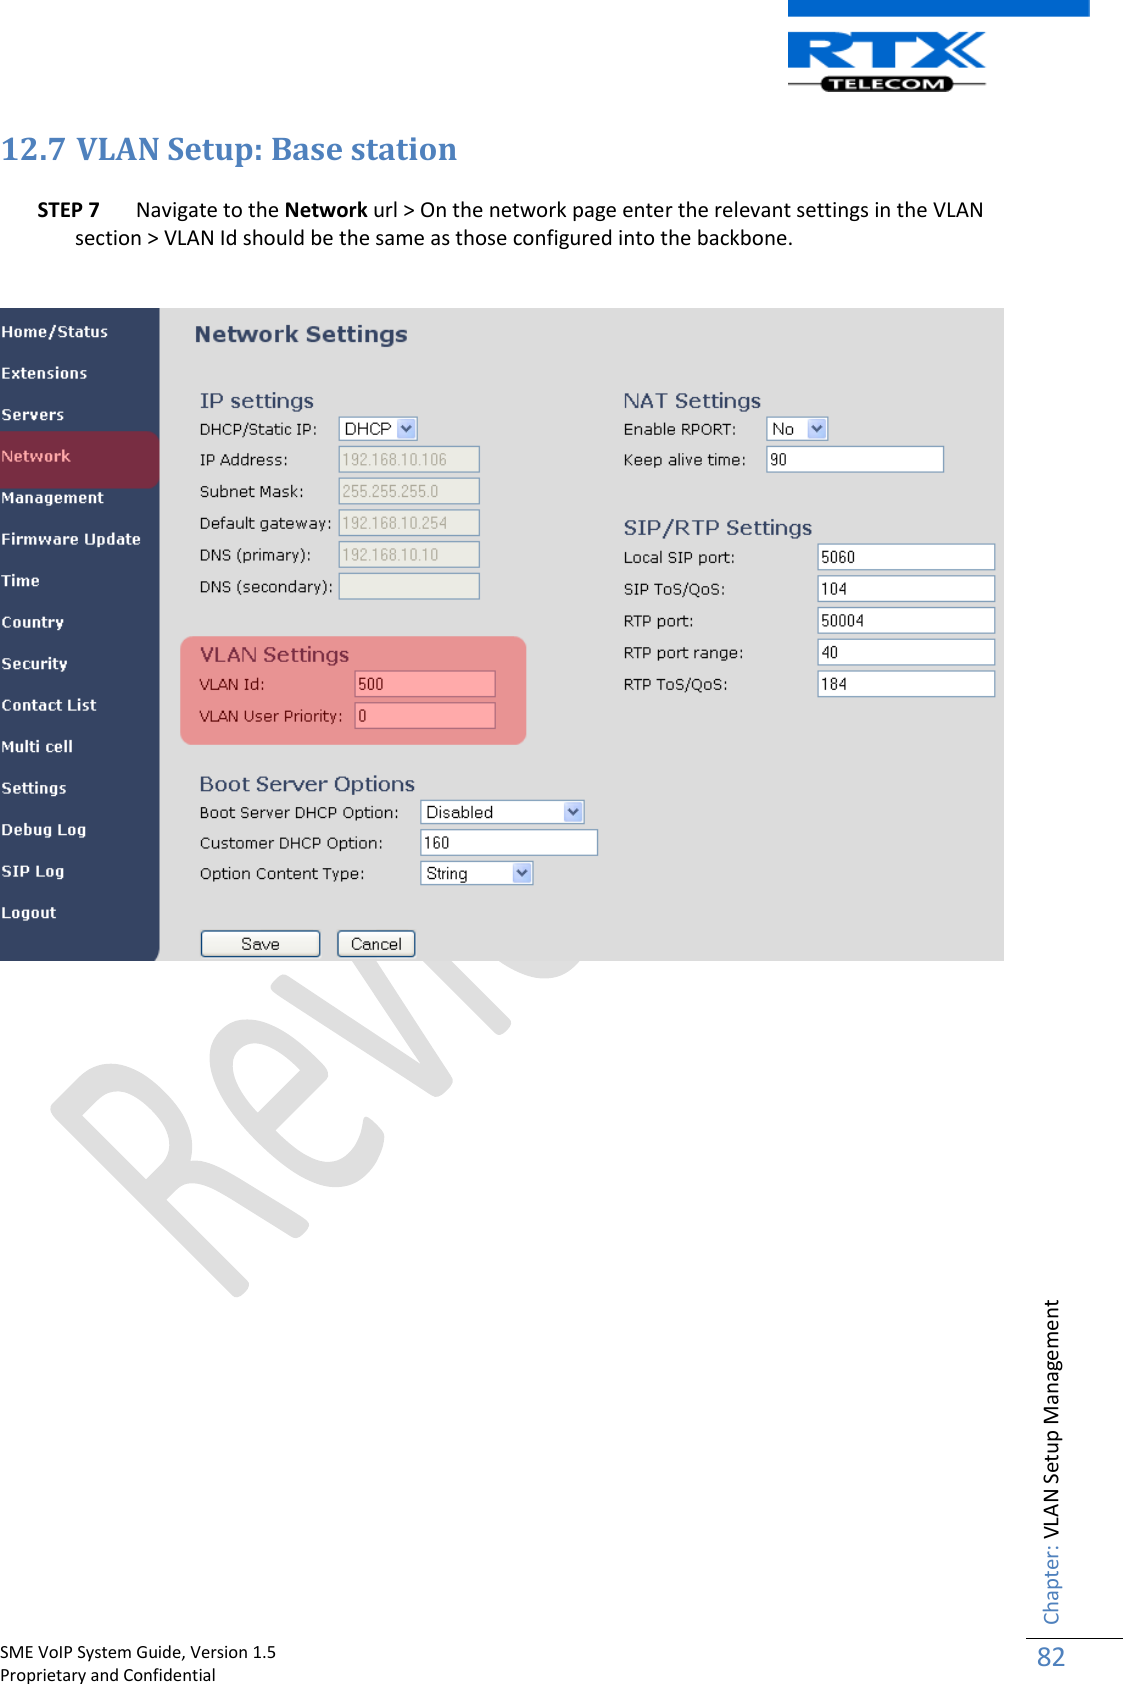    SME VoIP System Guide, Version 1.5                                                                                                                                                          Proprietary and Confidential    Chapter: VLAN Setup Management 82  12.7 VLAN Setup: Base station  STEP 7 Navigate to the Network url &gt; On the network page enter the relevant settings in the VLAN section &gt; VLAN Id should be the same as those configured into the backbone.                        